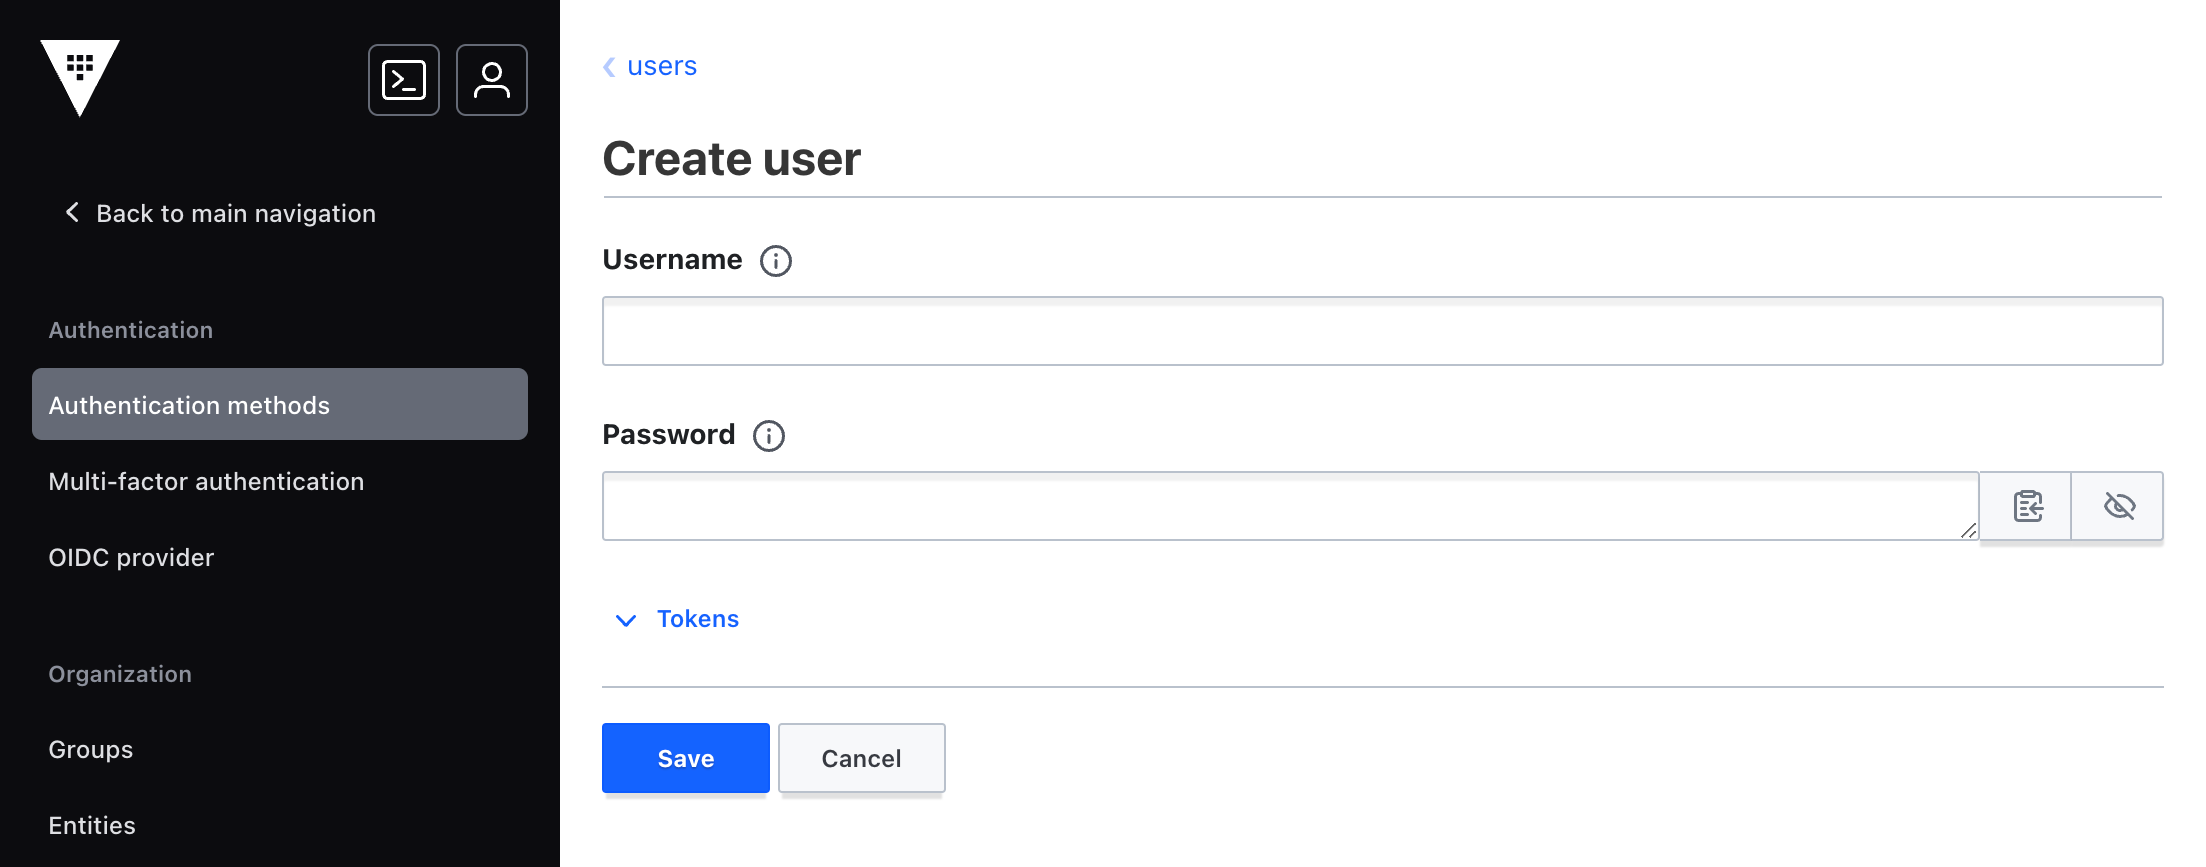 create username and password
fields